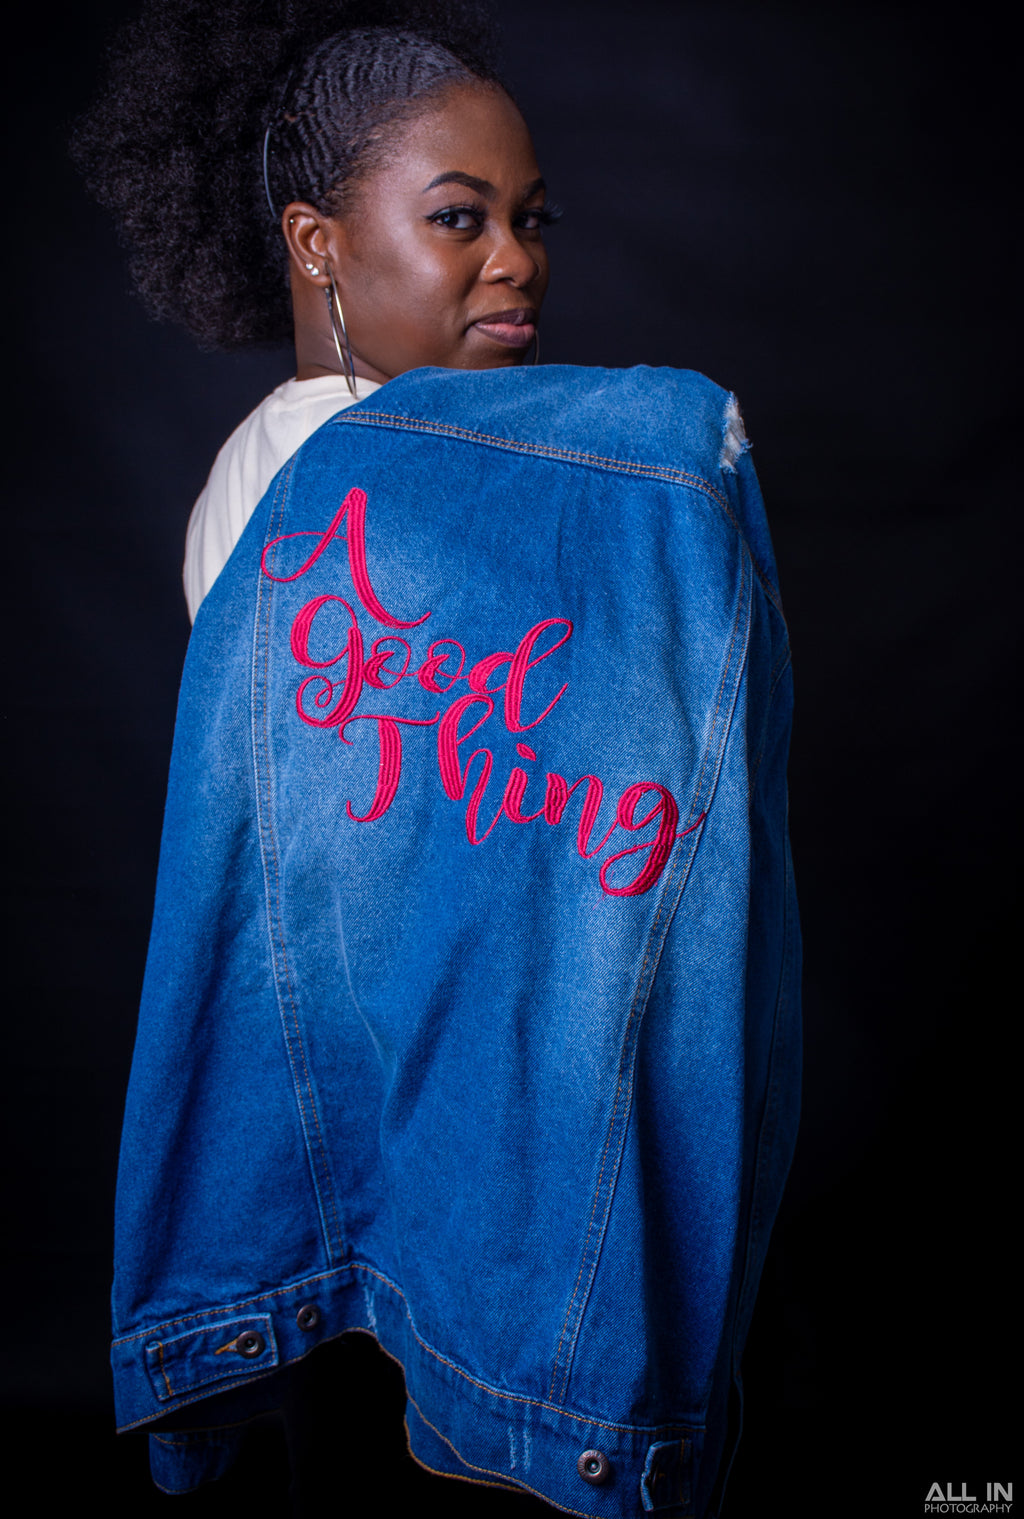 A Good Thing Embroidered Denim Jacket